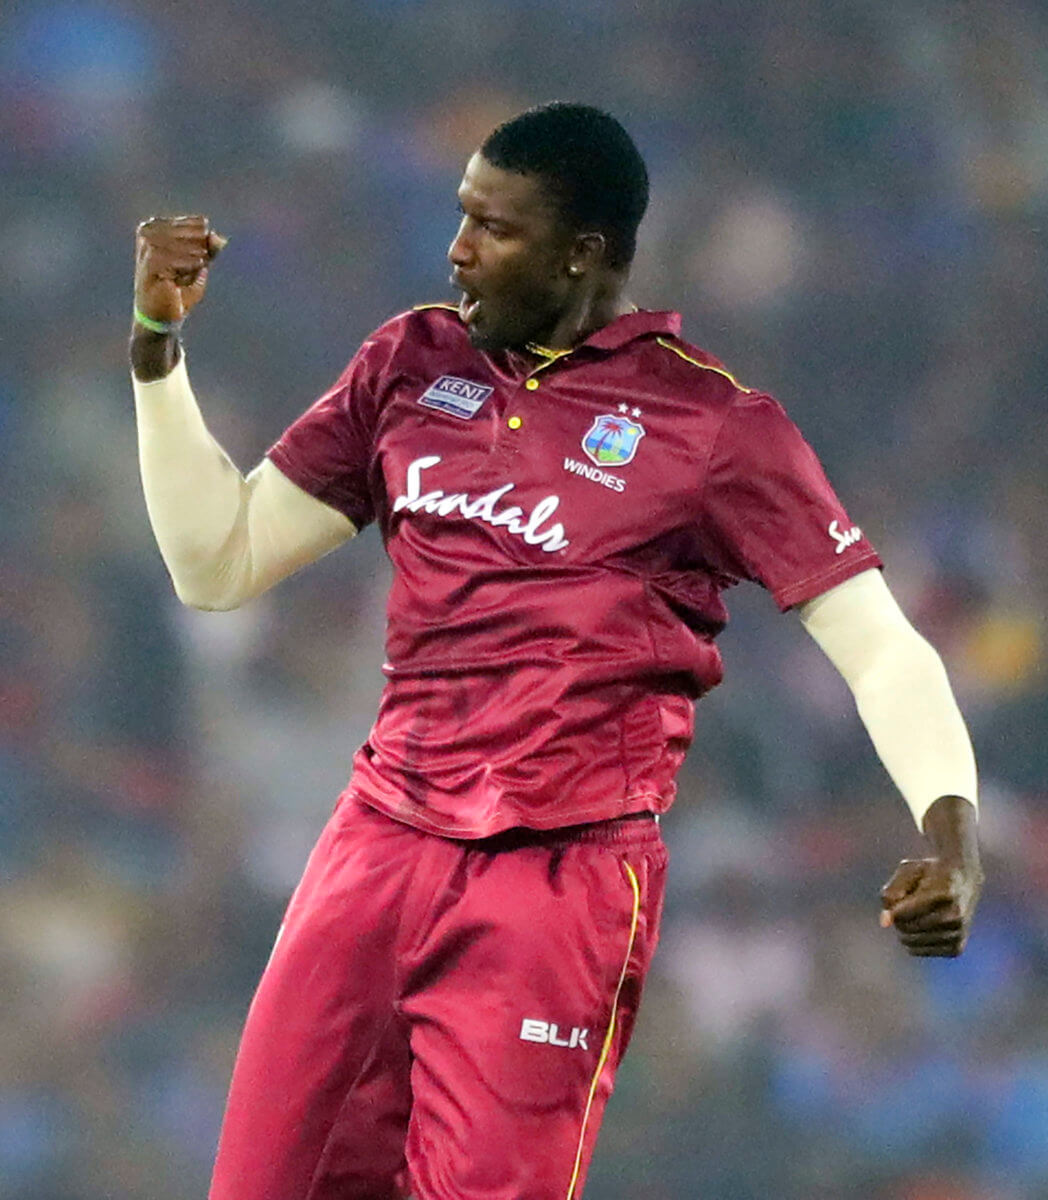 West Indies' Jason Holder celebrates the dismissal of India's Rohit Sharma during the third and final one-day international cricket match of the series between India and West Indies in Cuttack, India, Sunday, Dec. 22, 2019.